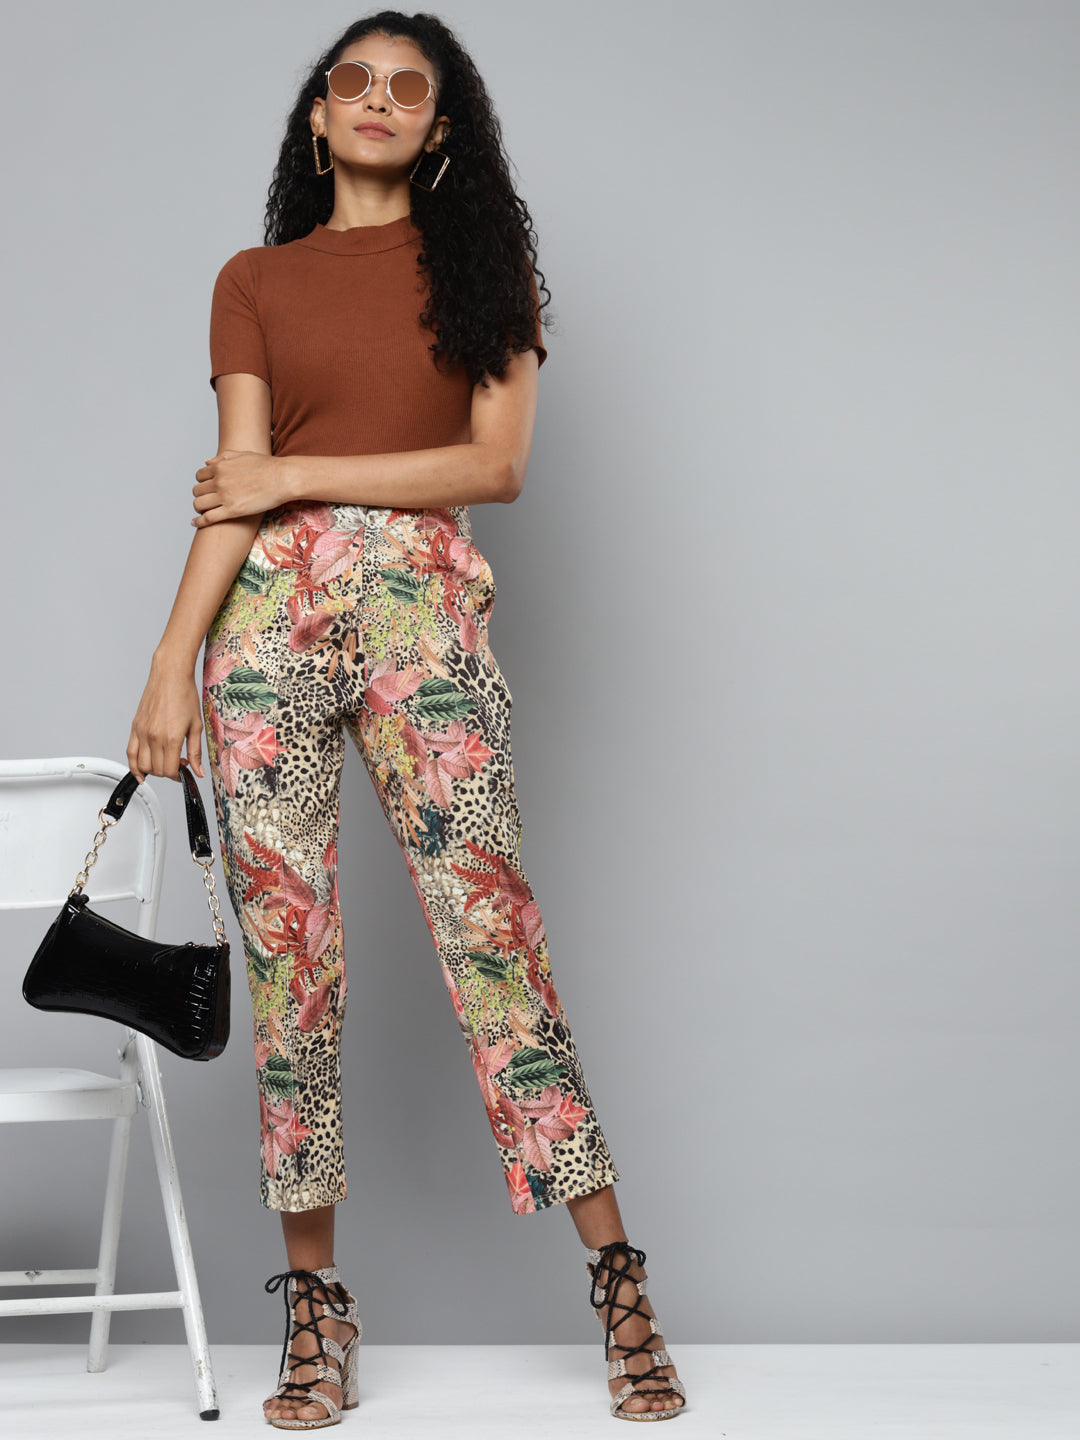 Beige Scuba Cheetah Floral Tapered Pants